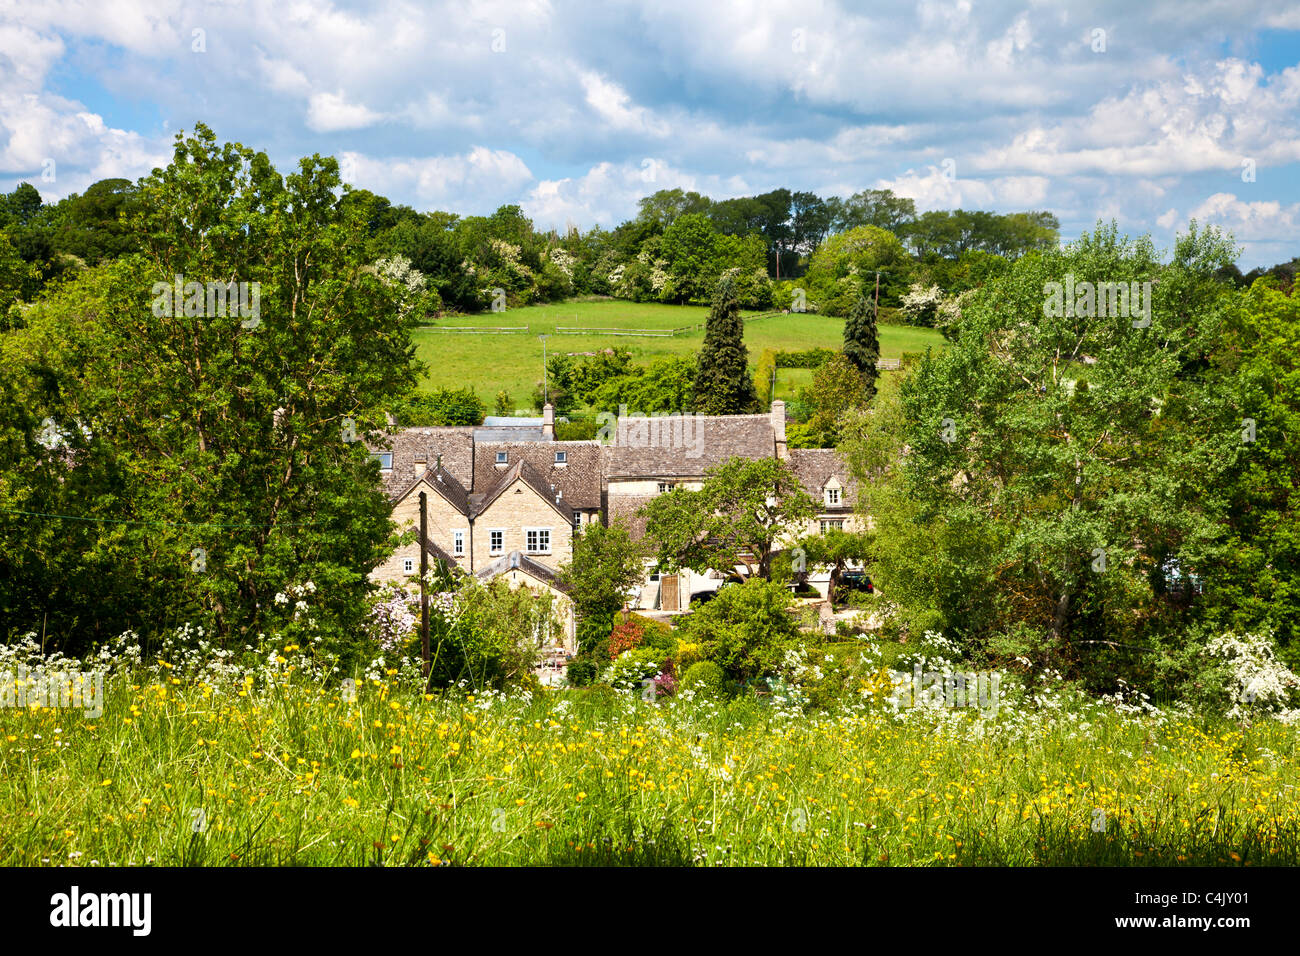 Houses and cottages in the pretty Cotswold village of Shilton, Oxfordshire, England, UK on a sunny day in spring Stock Photo